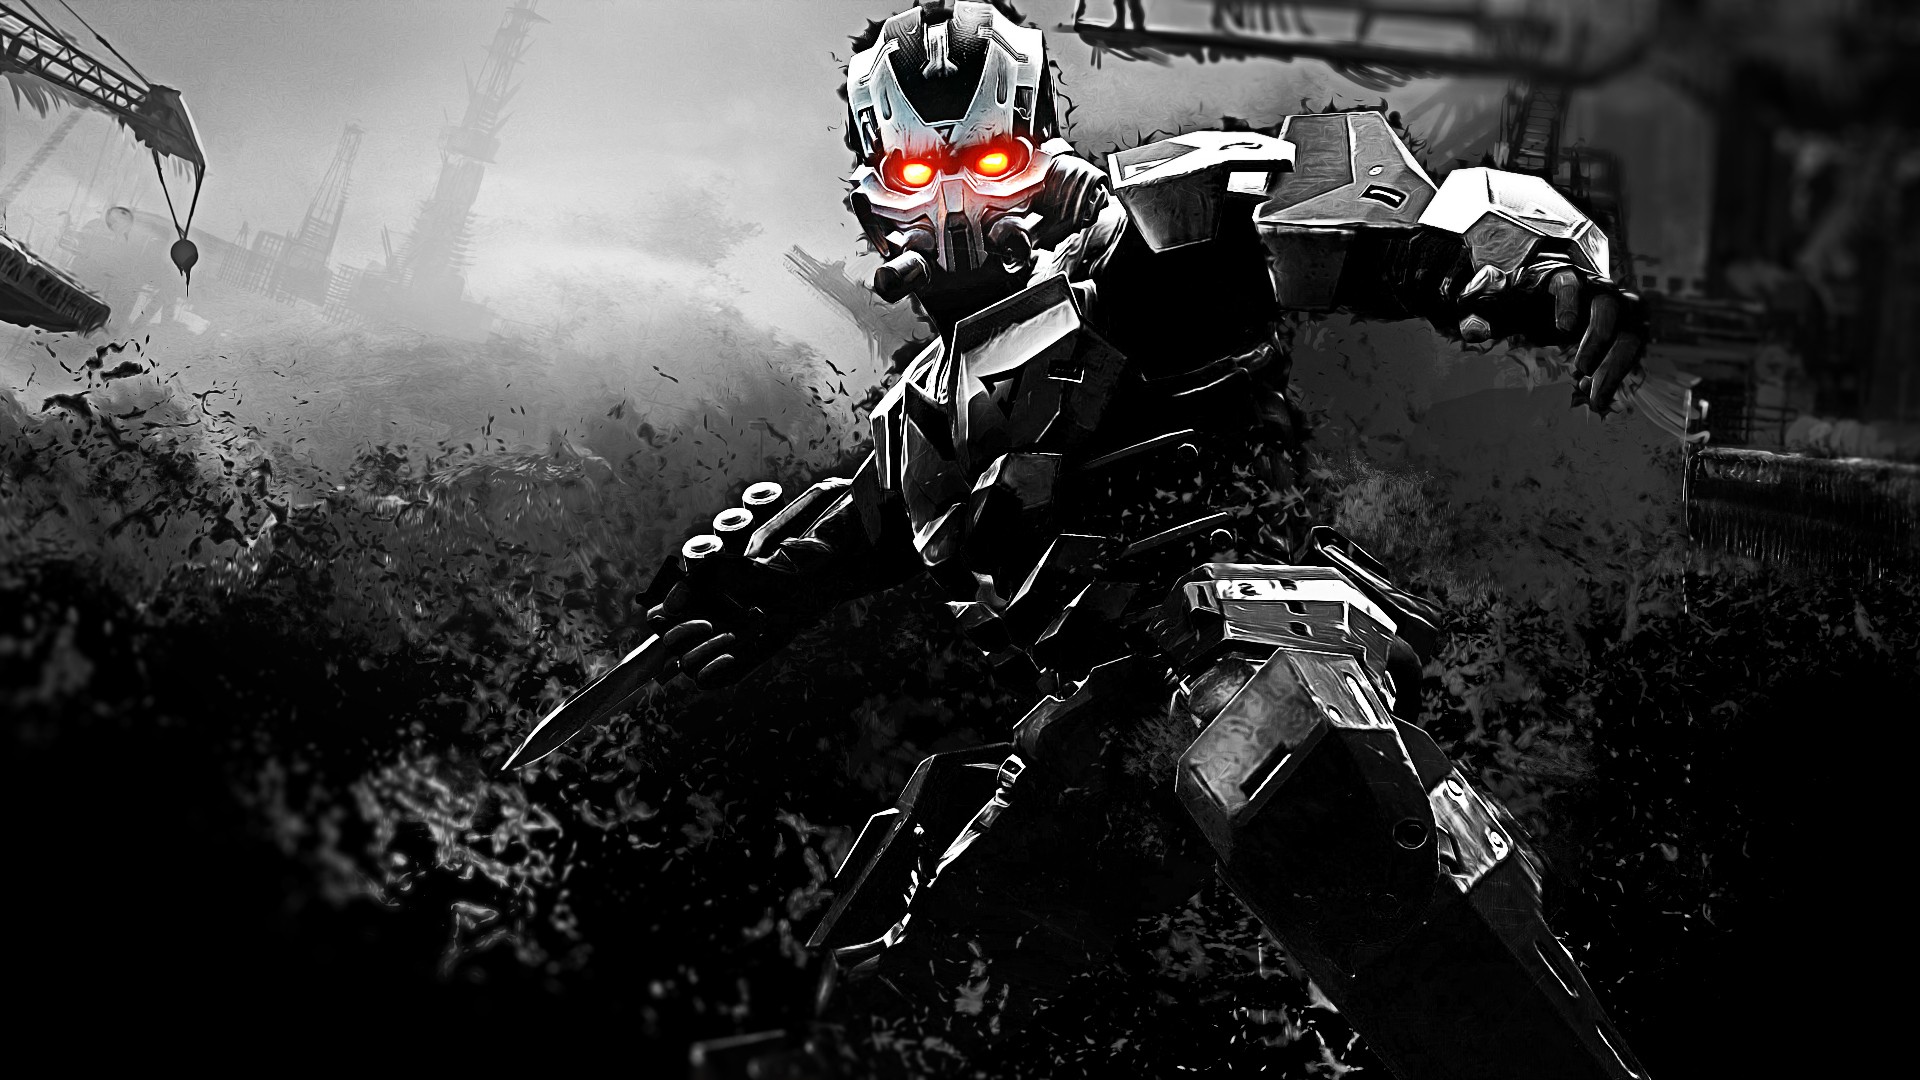 General 1920x1080 video games Killzone video game art science fiction glowing eyes